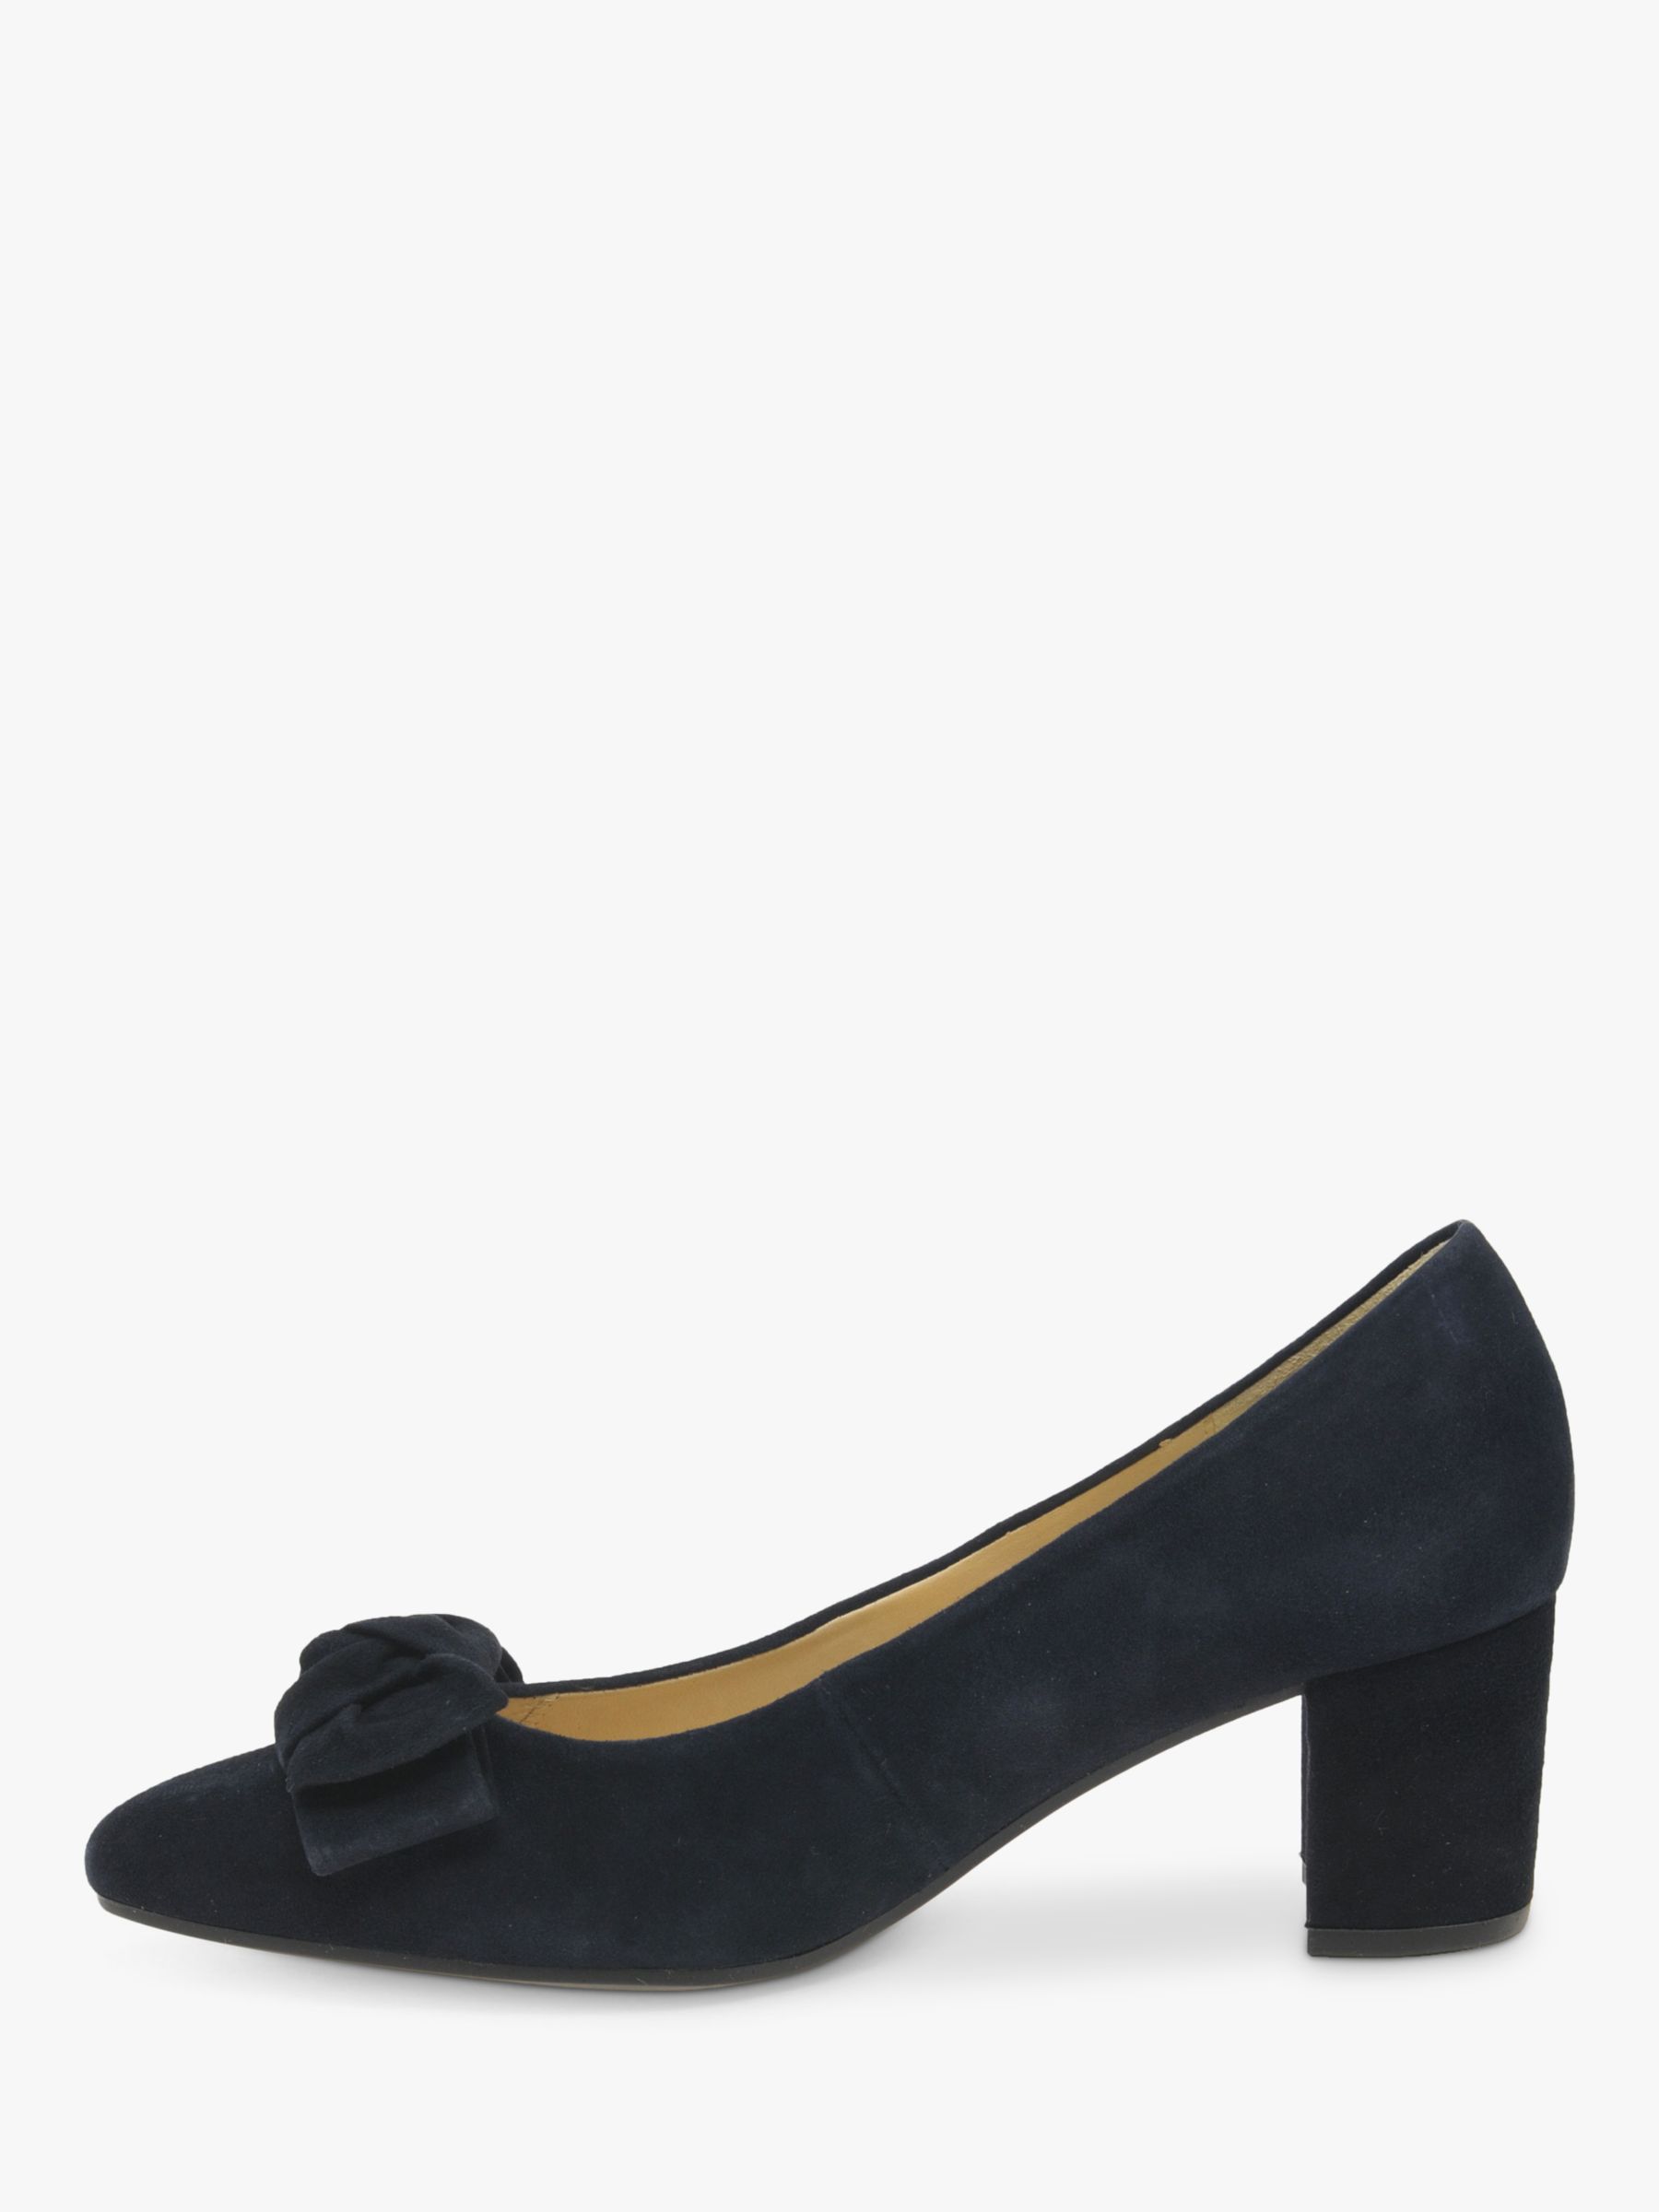 Gabor Kesh Suede Bow Detail Court Shoes, Navy at John Lewis & Partners